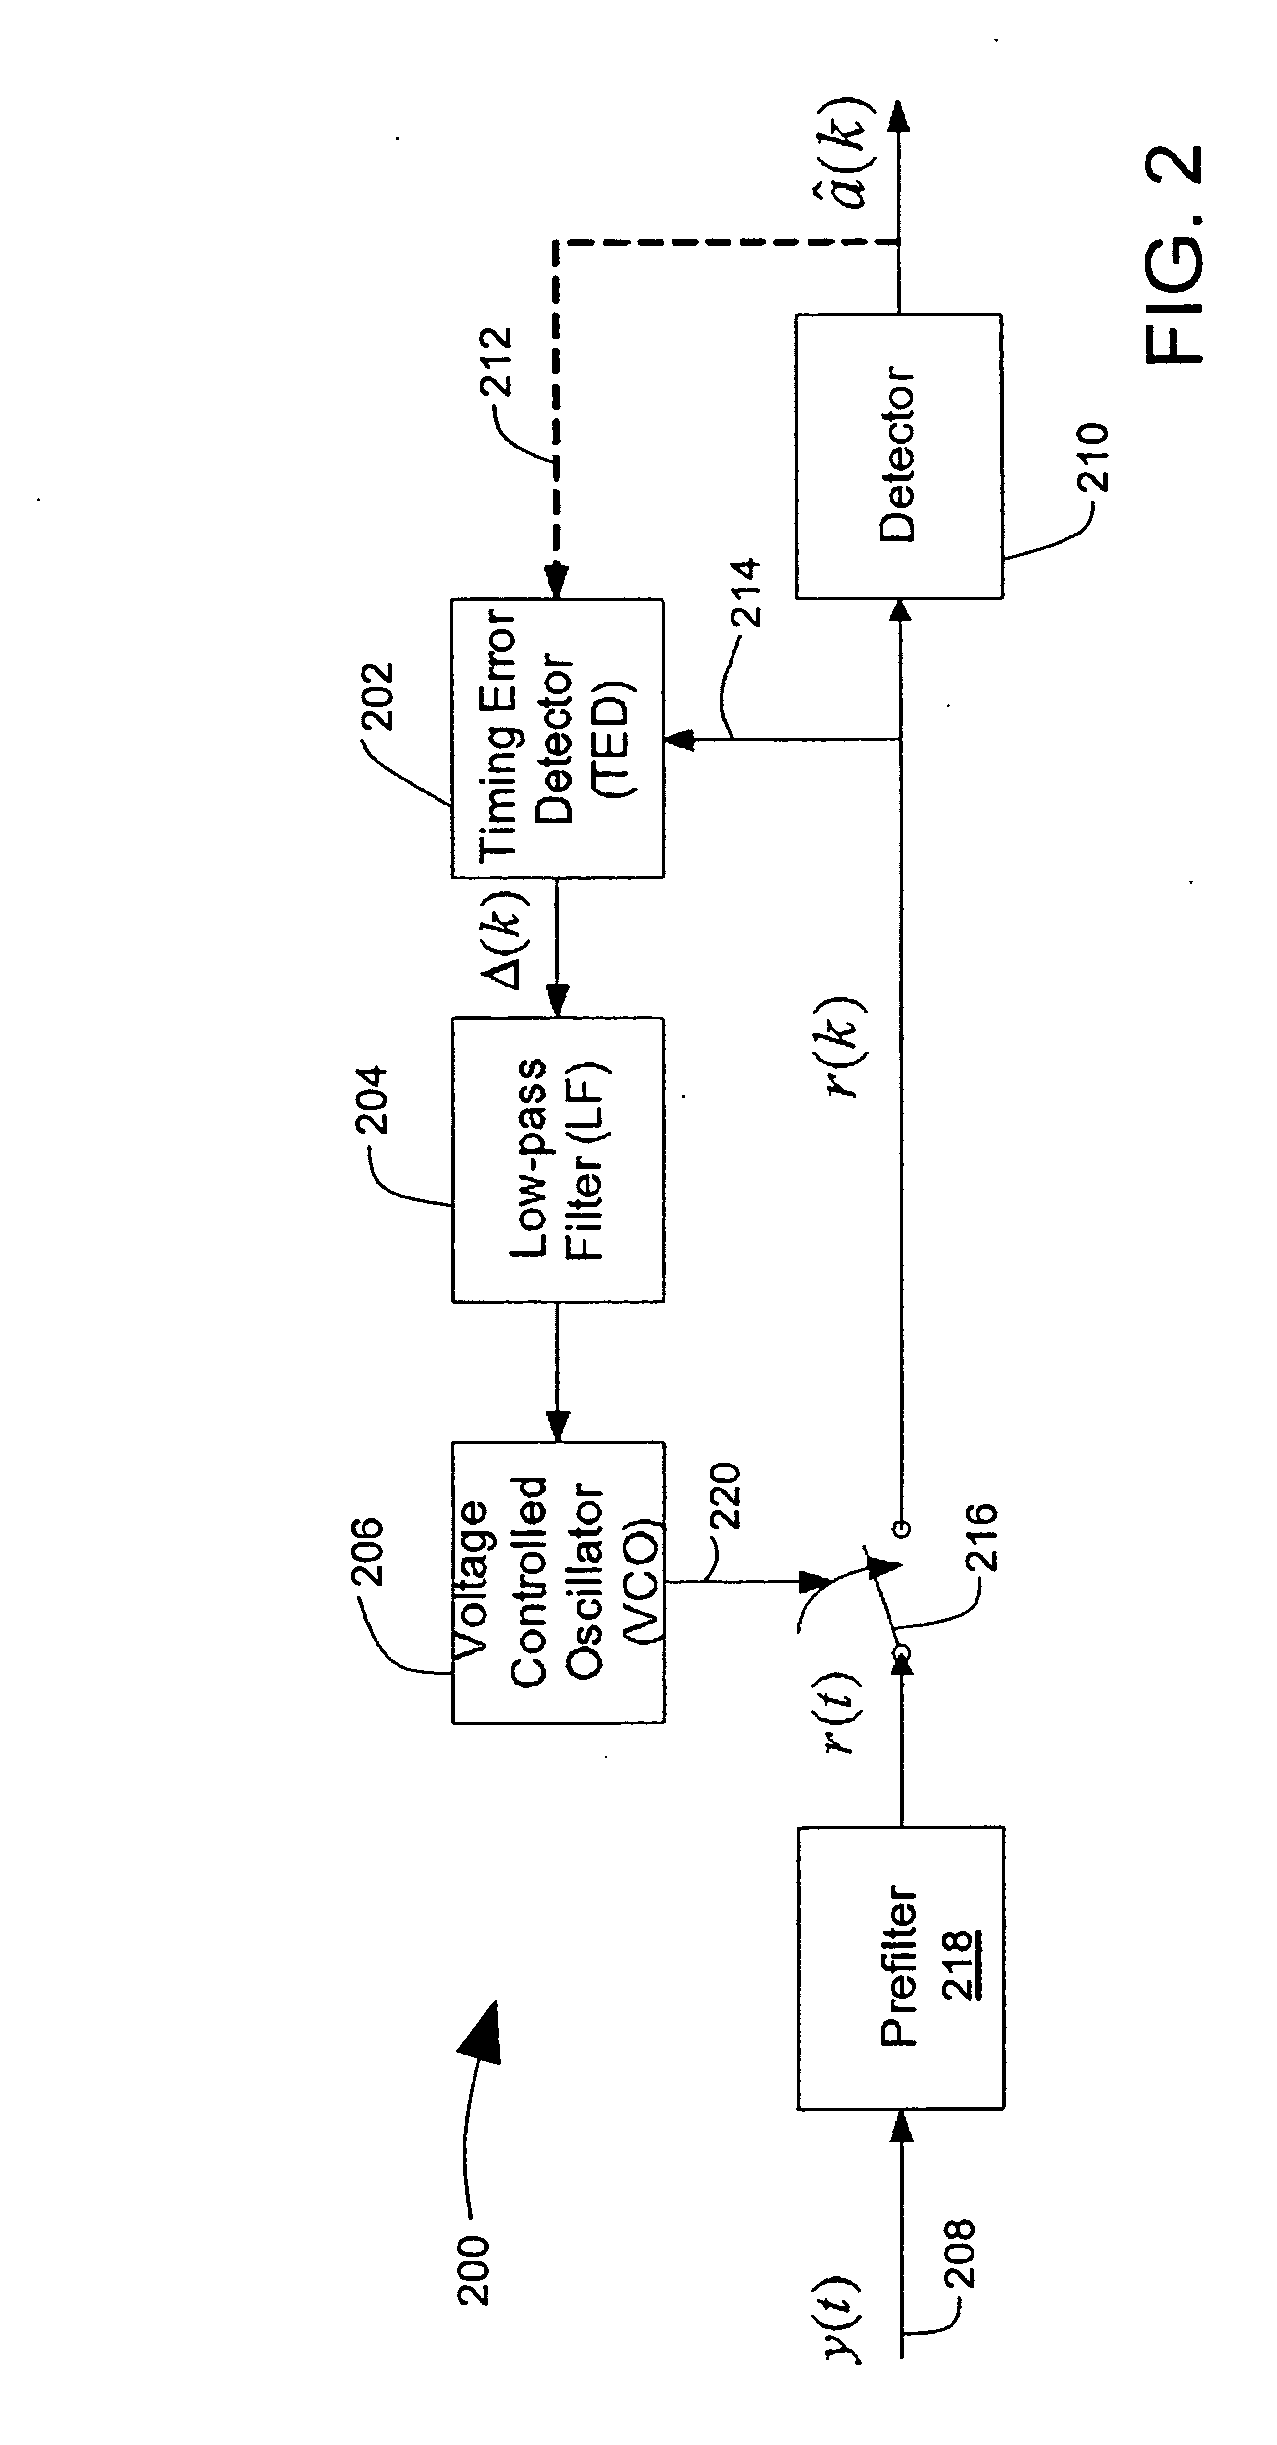 Timing recovery in a parallel channel communication system